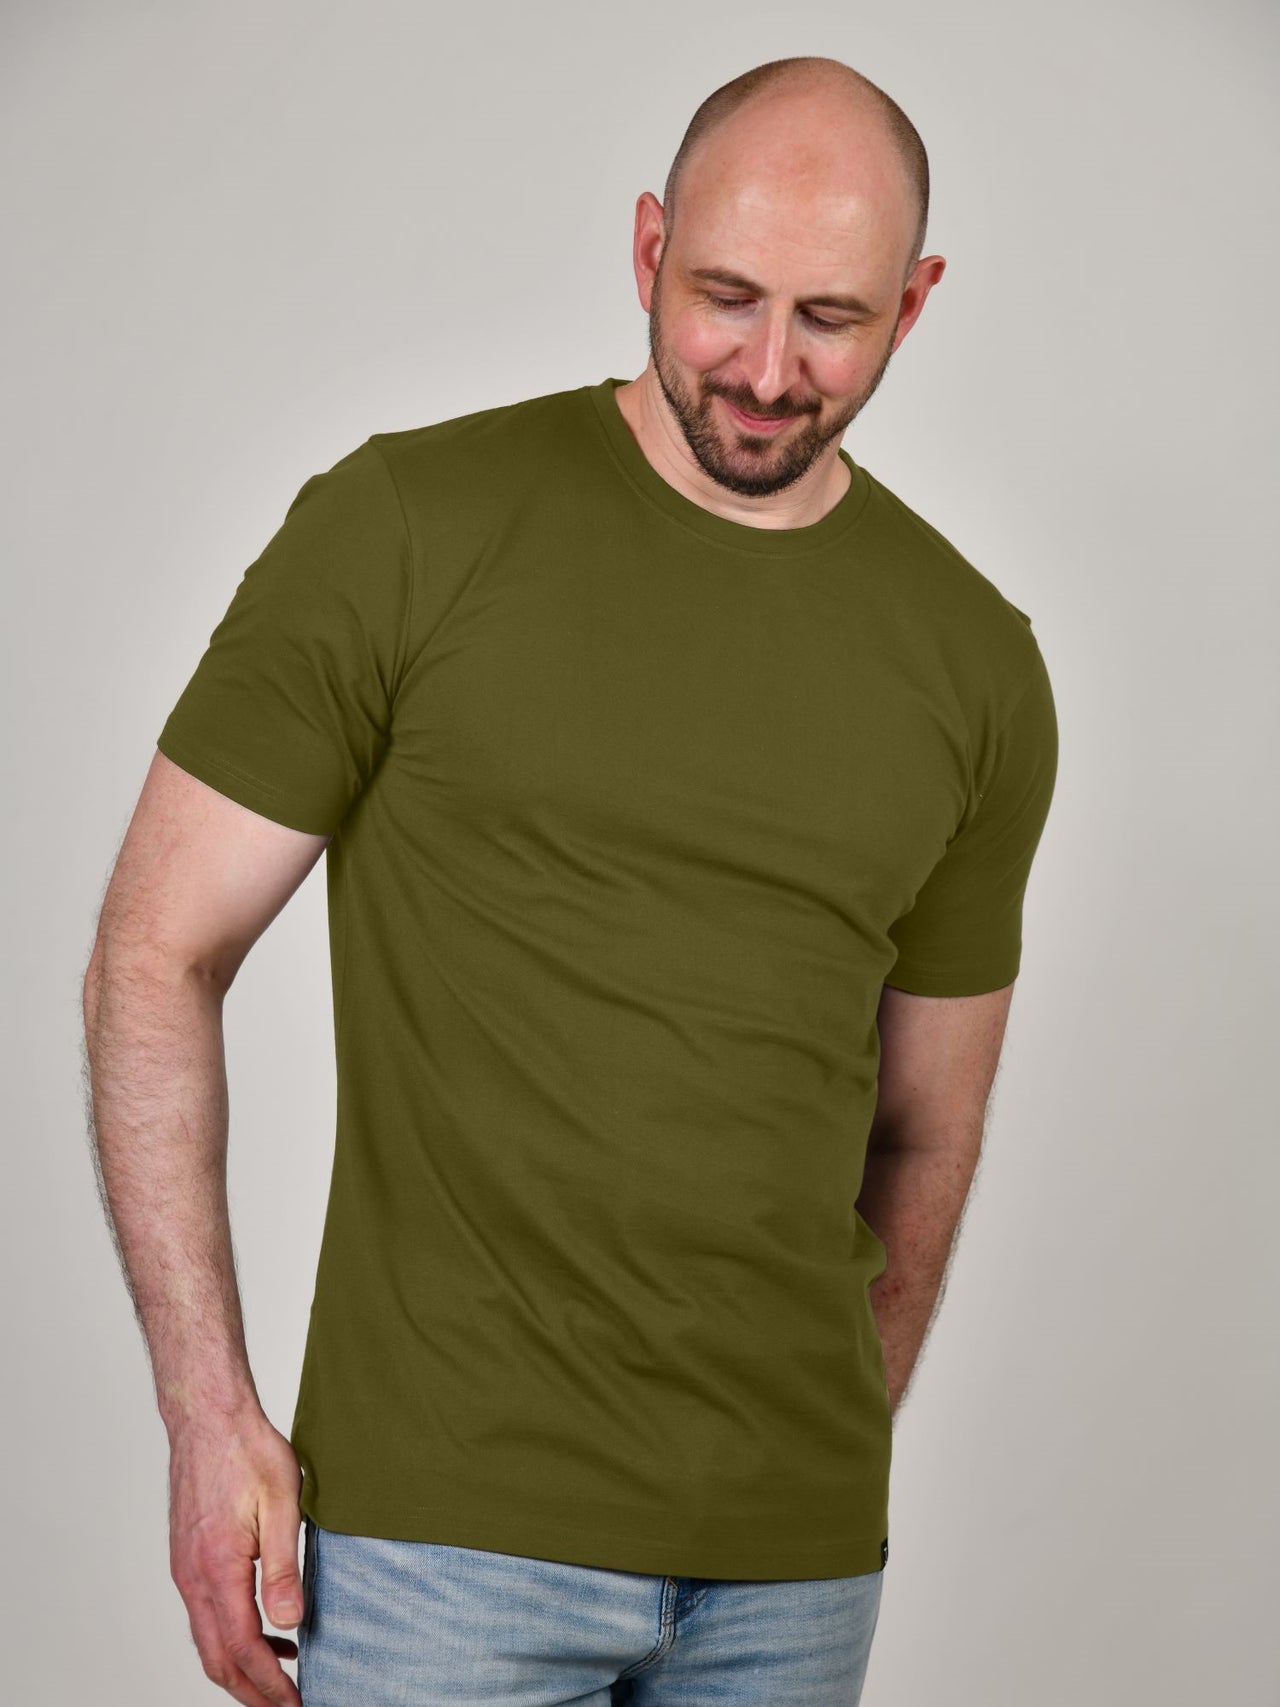 A close up of a tall athletic guy wearing a military green XL tall t-shirt.